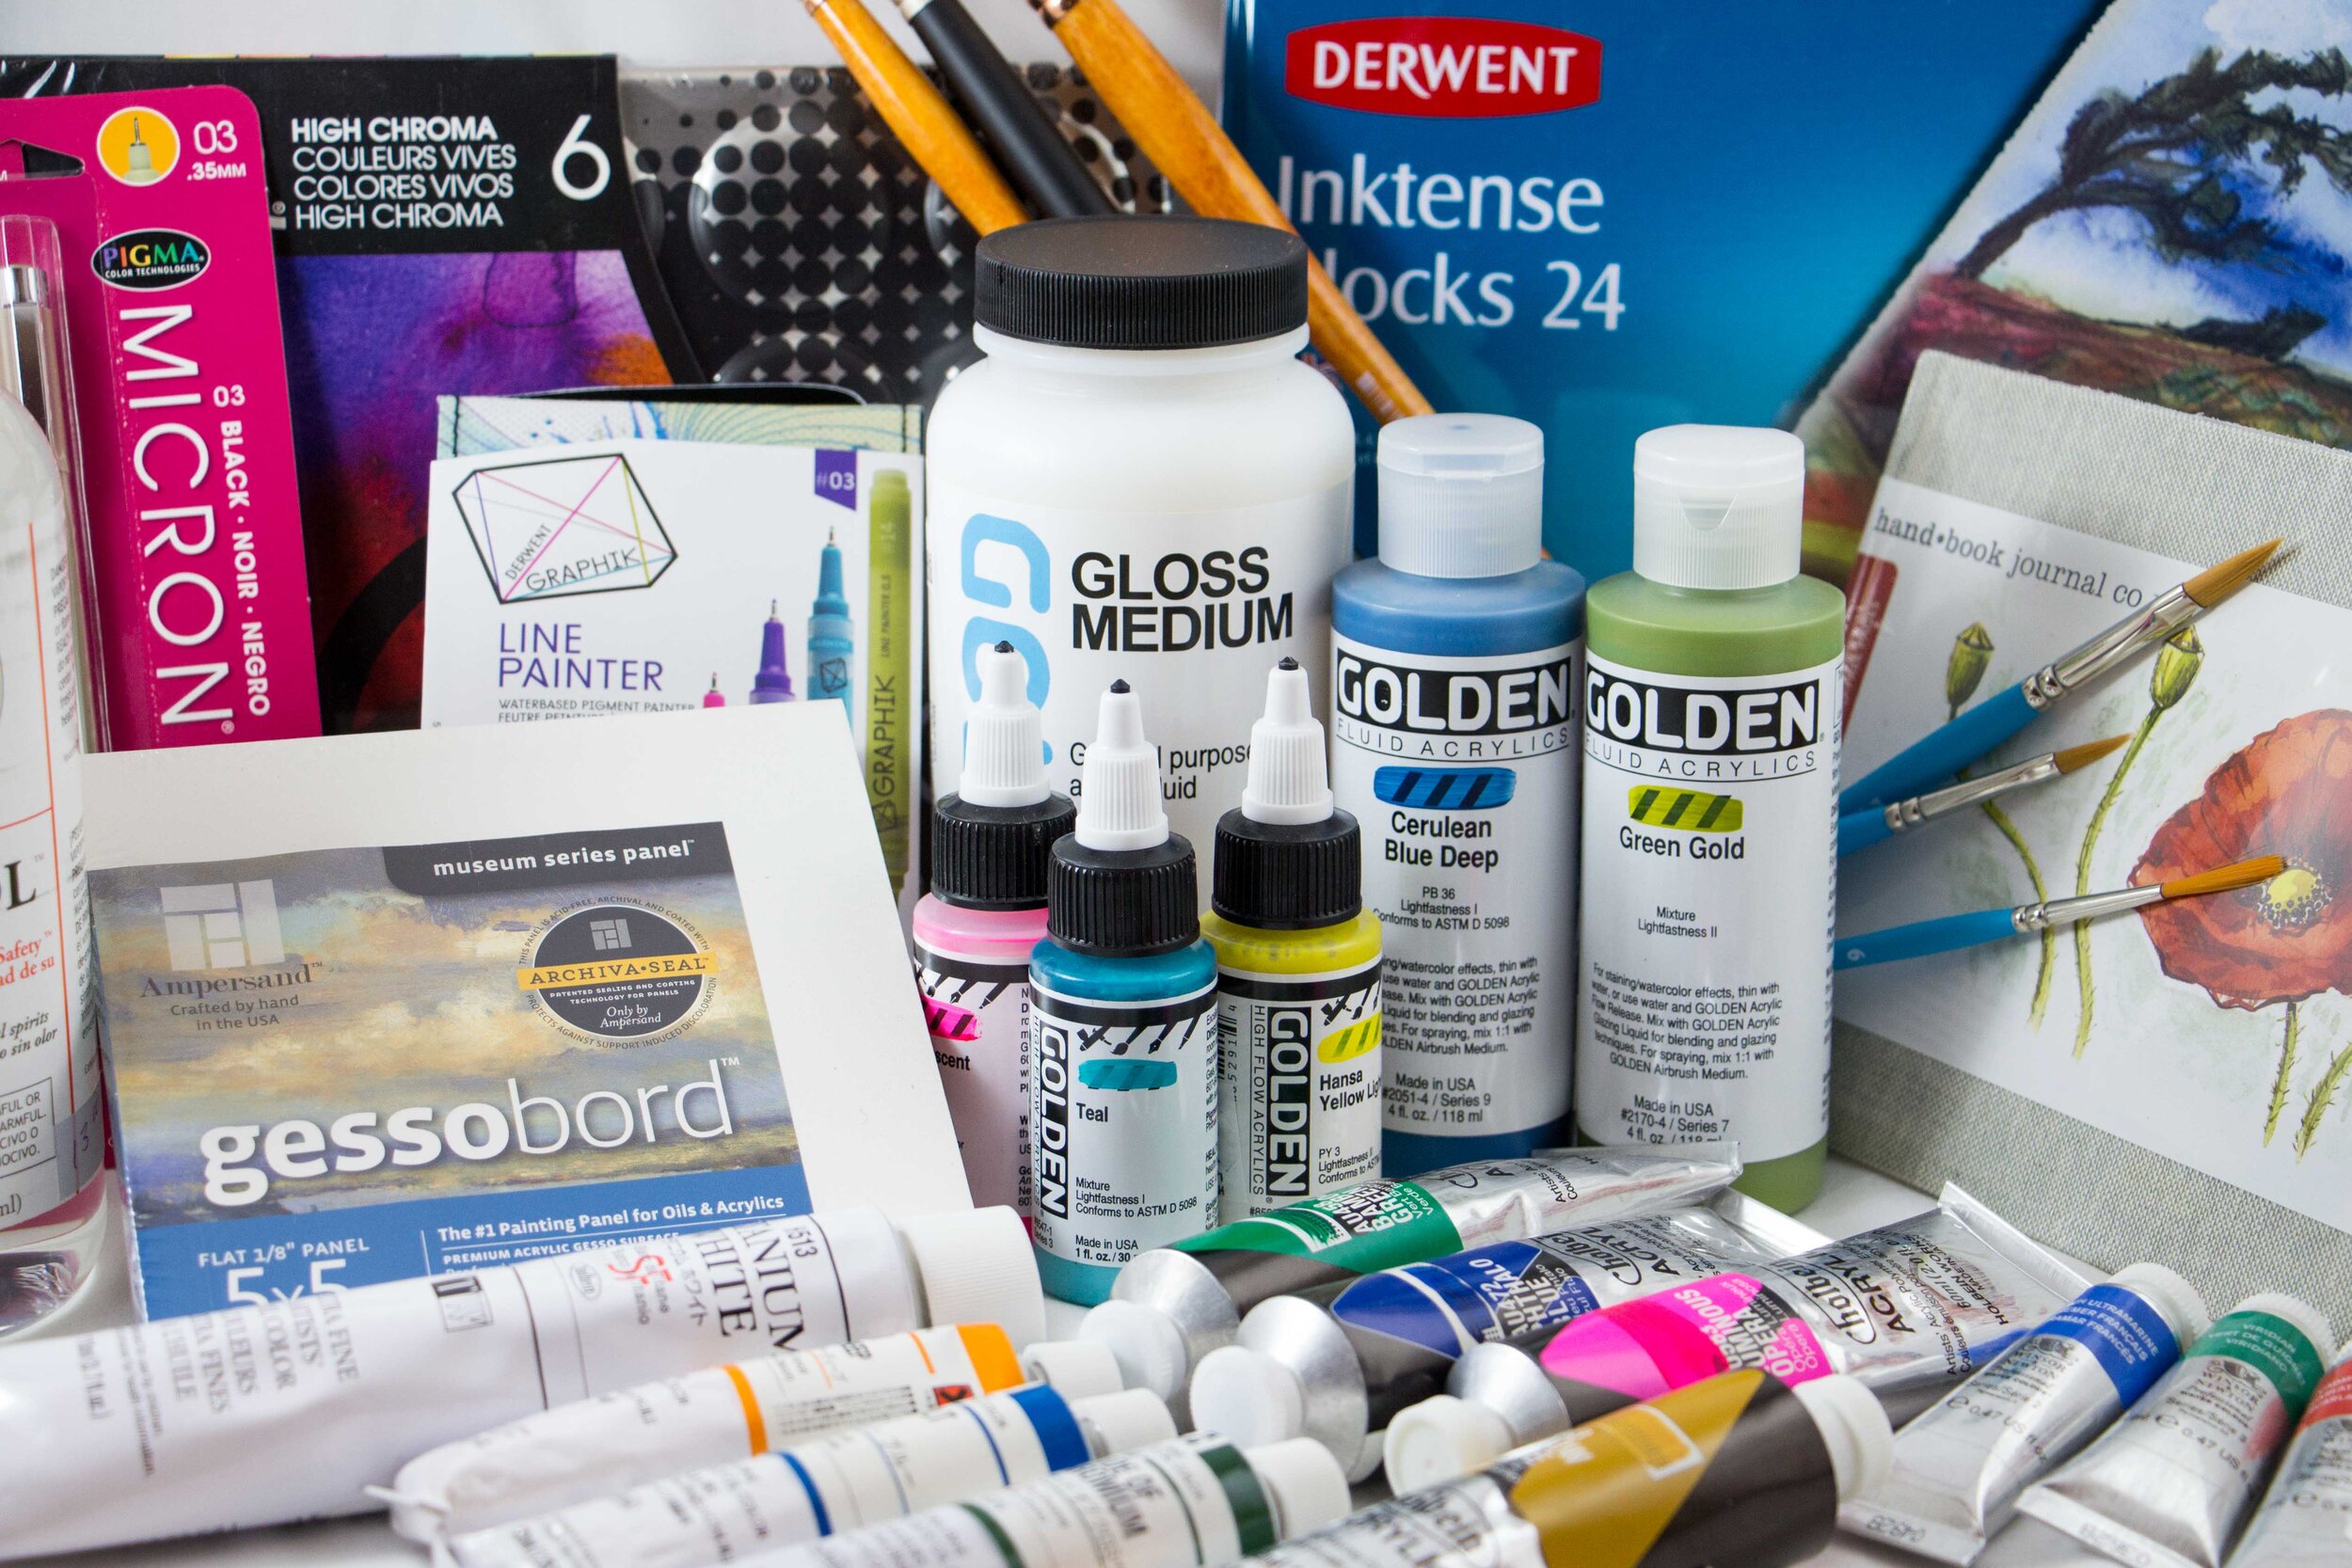 Example selection of art supplies available at the inn shop